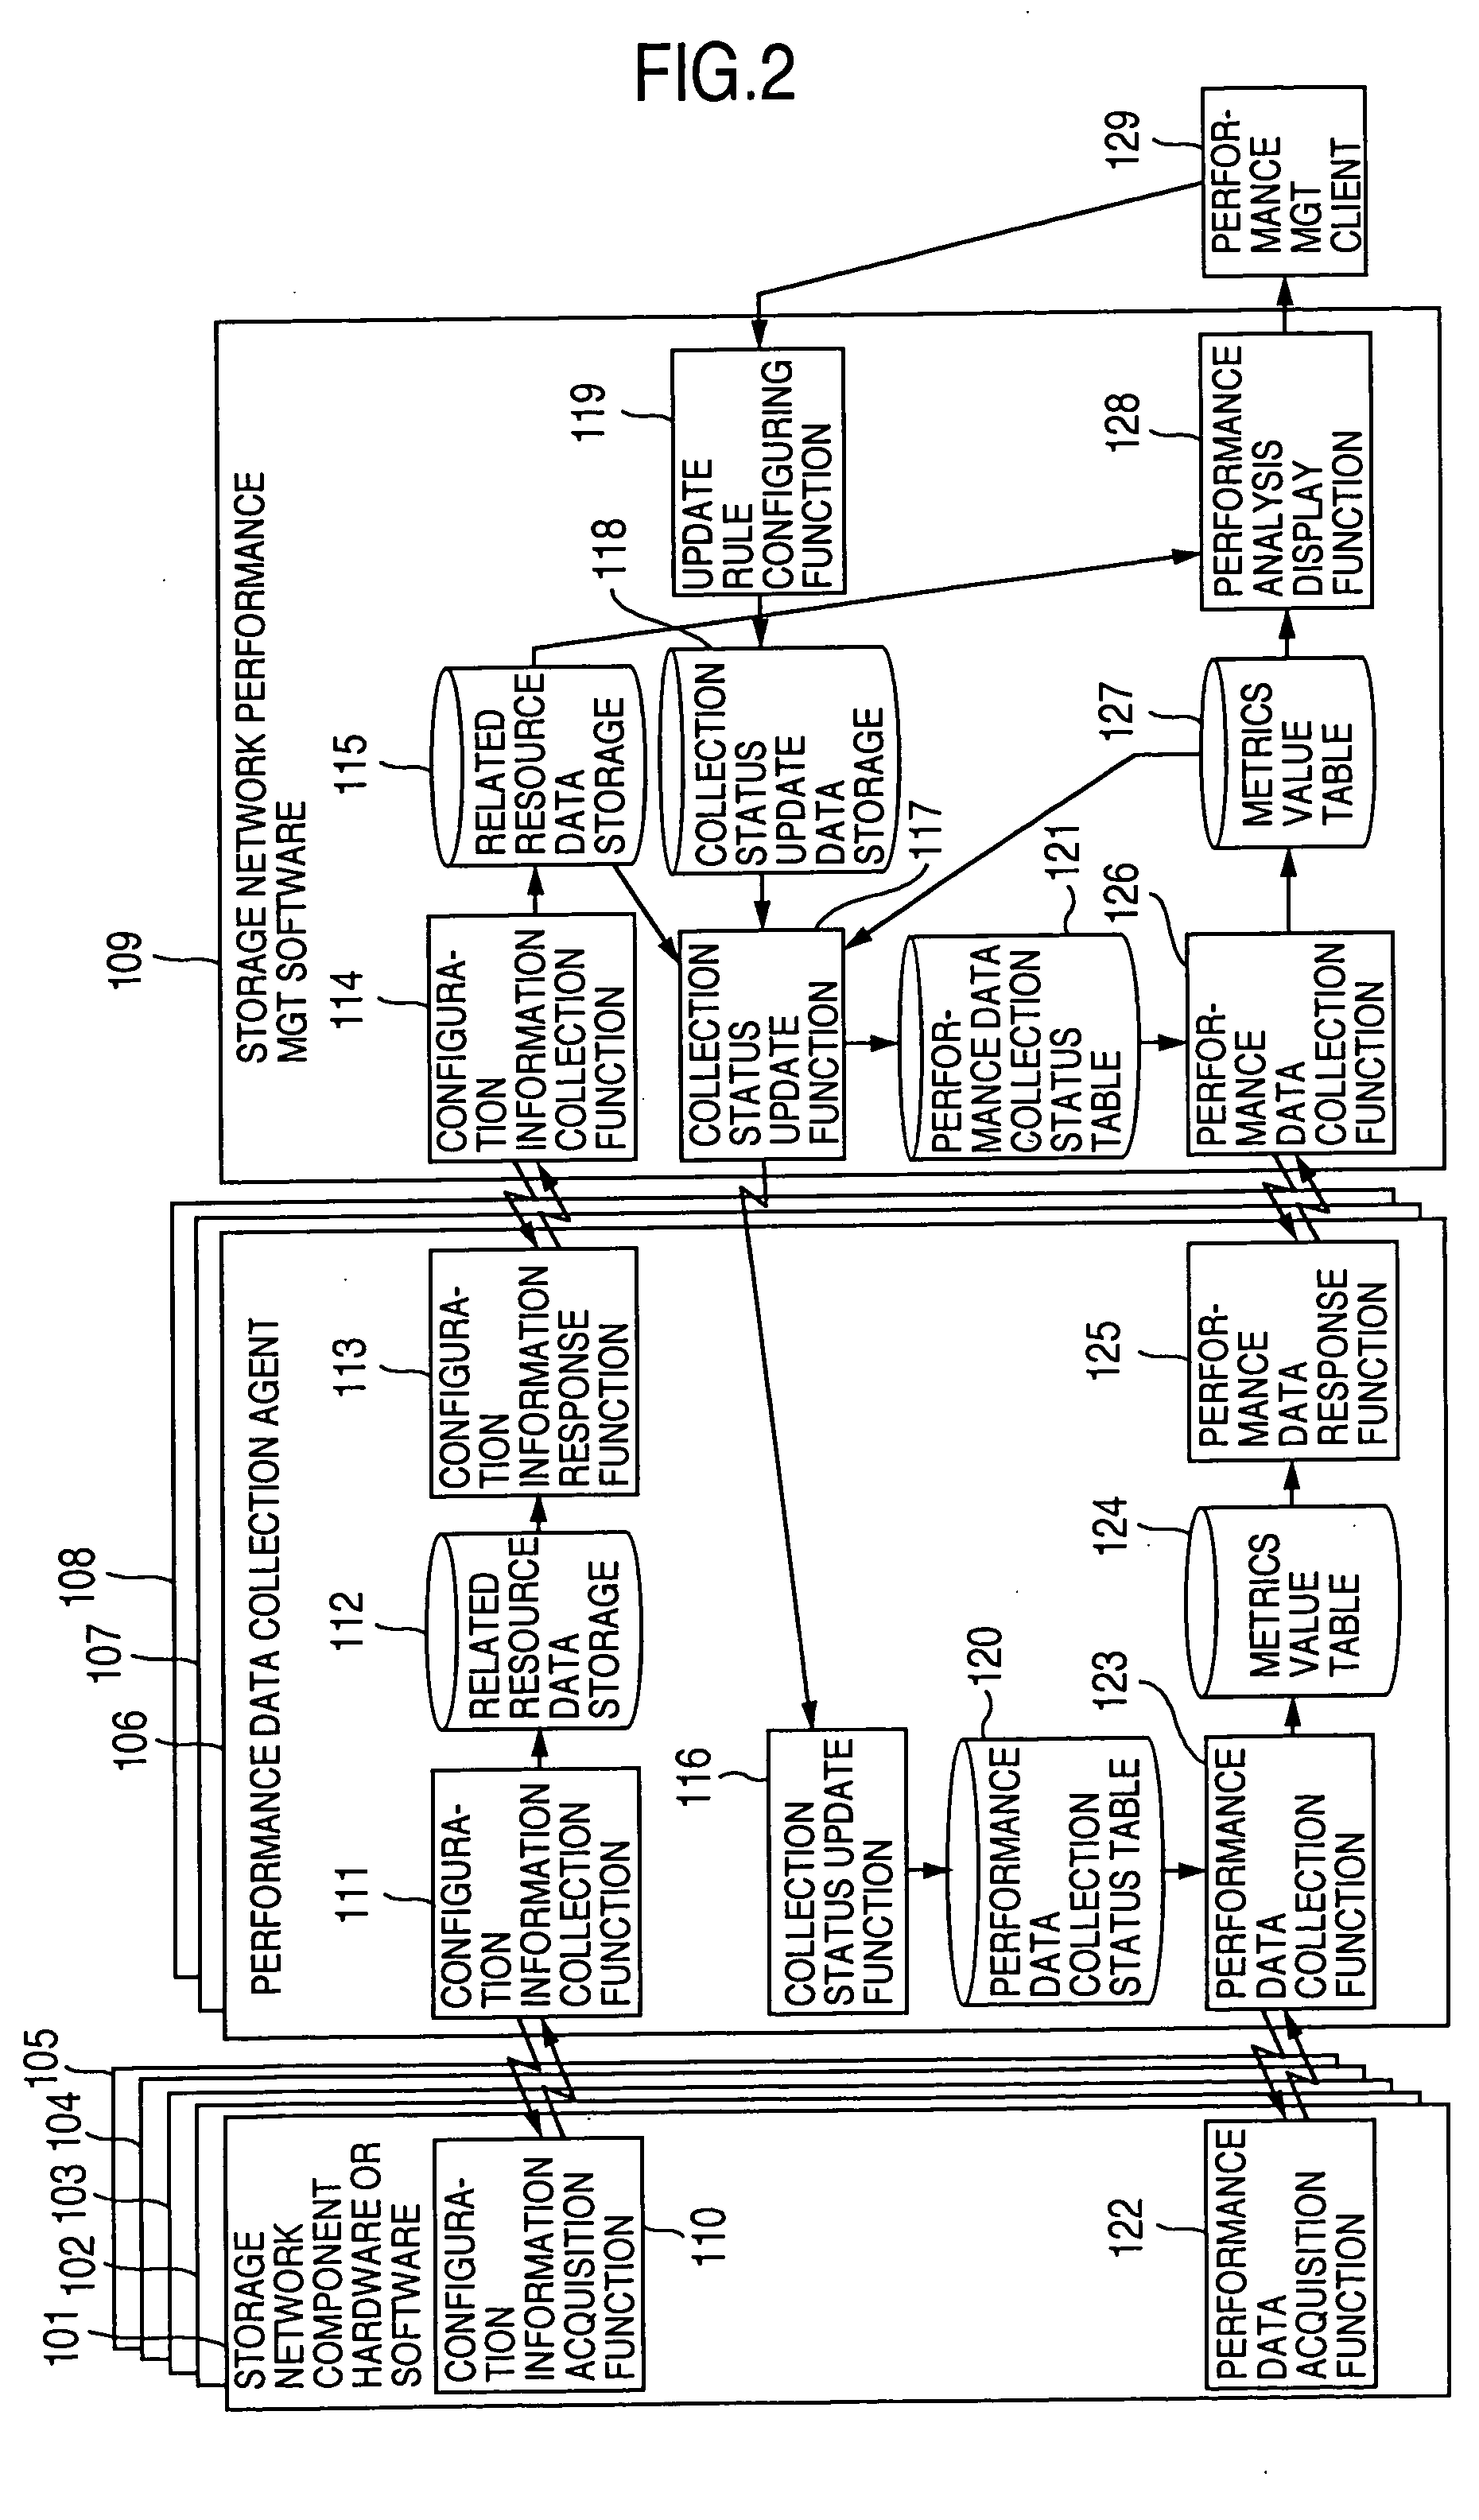 Method and program of collecting performance data for storage network